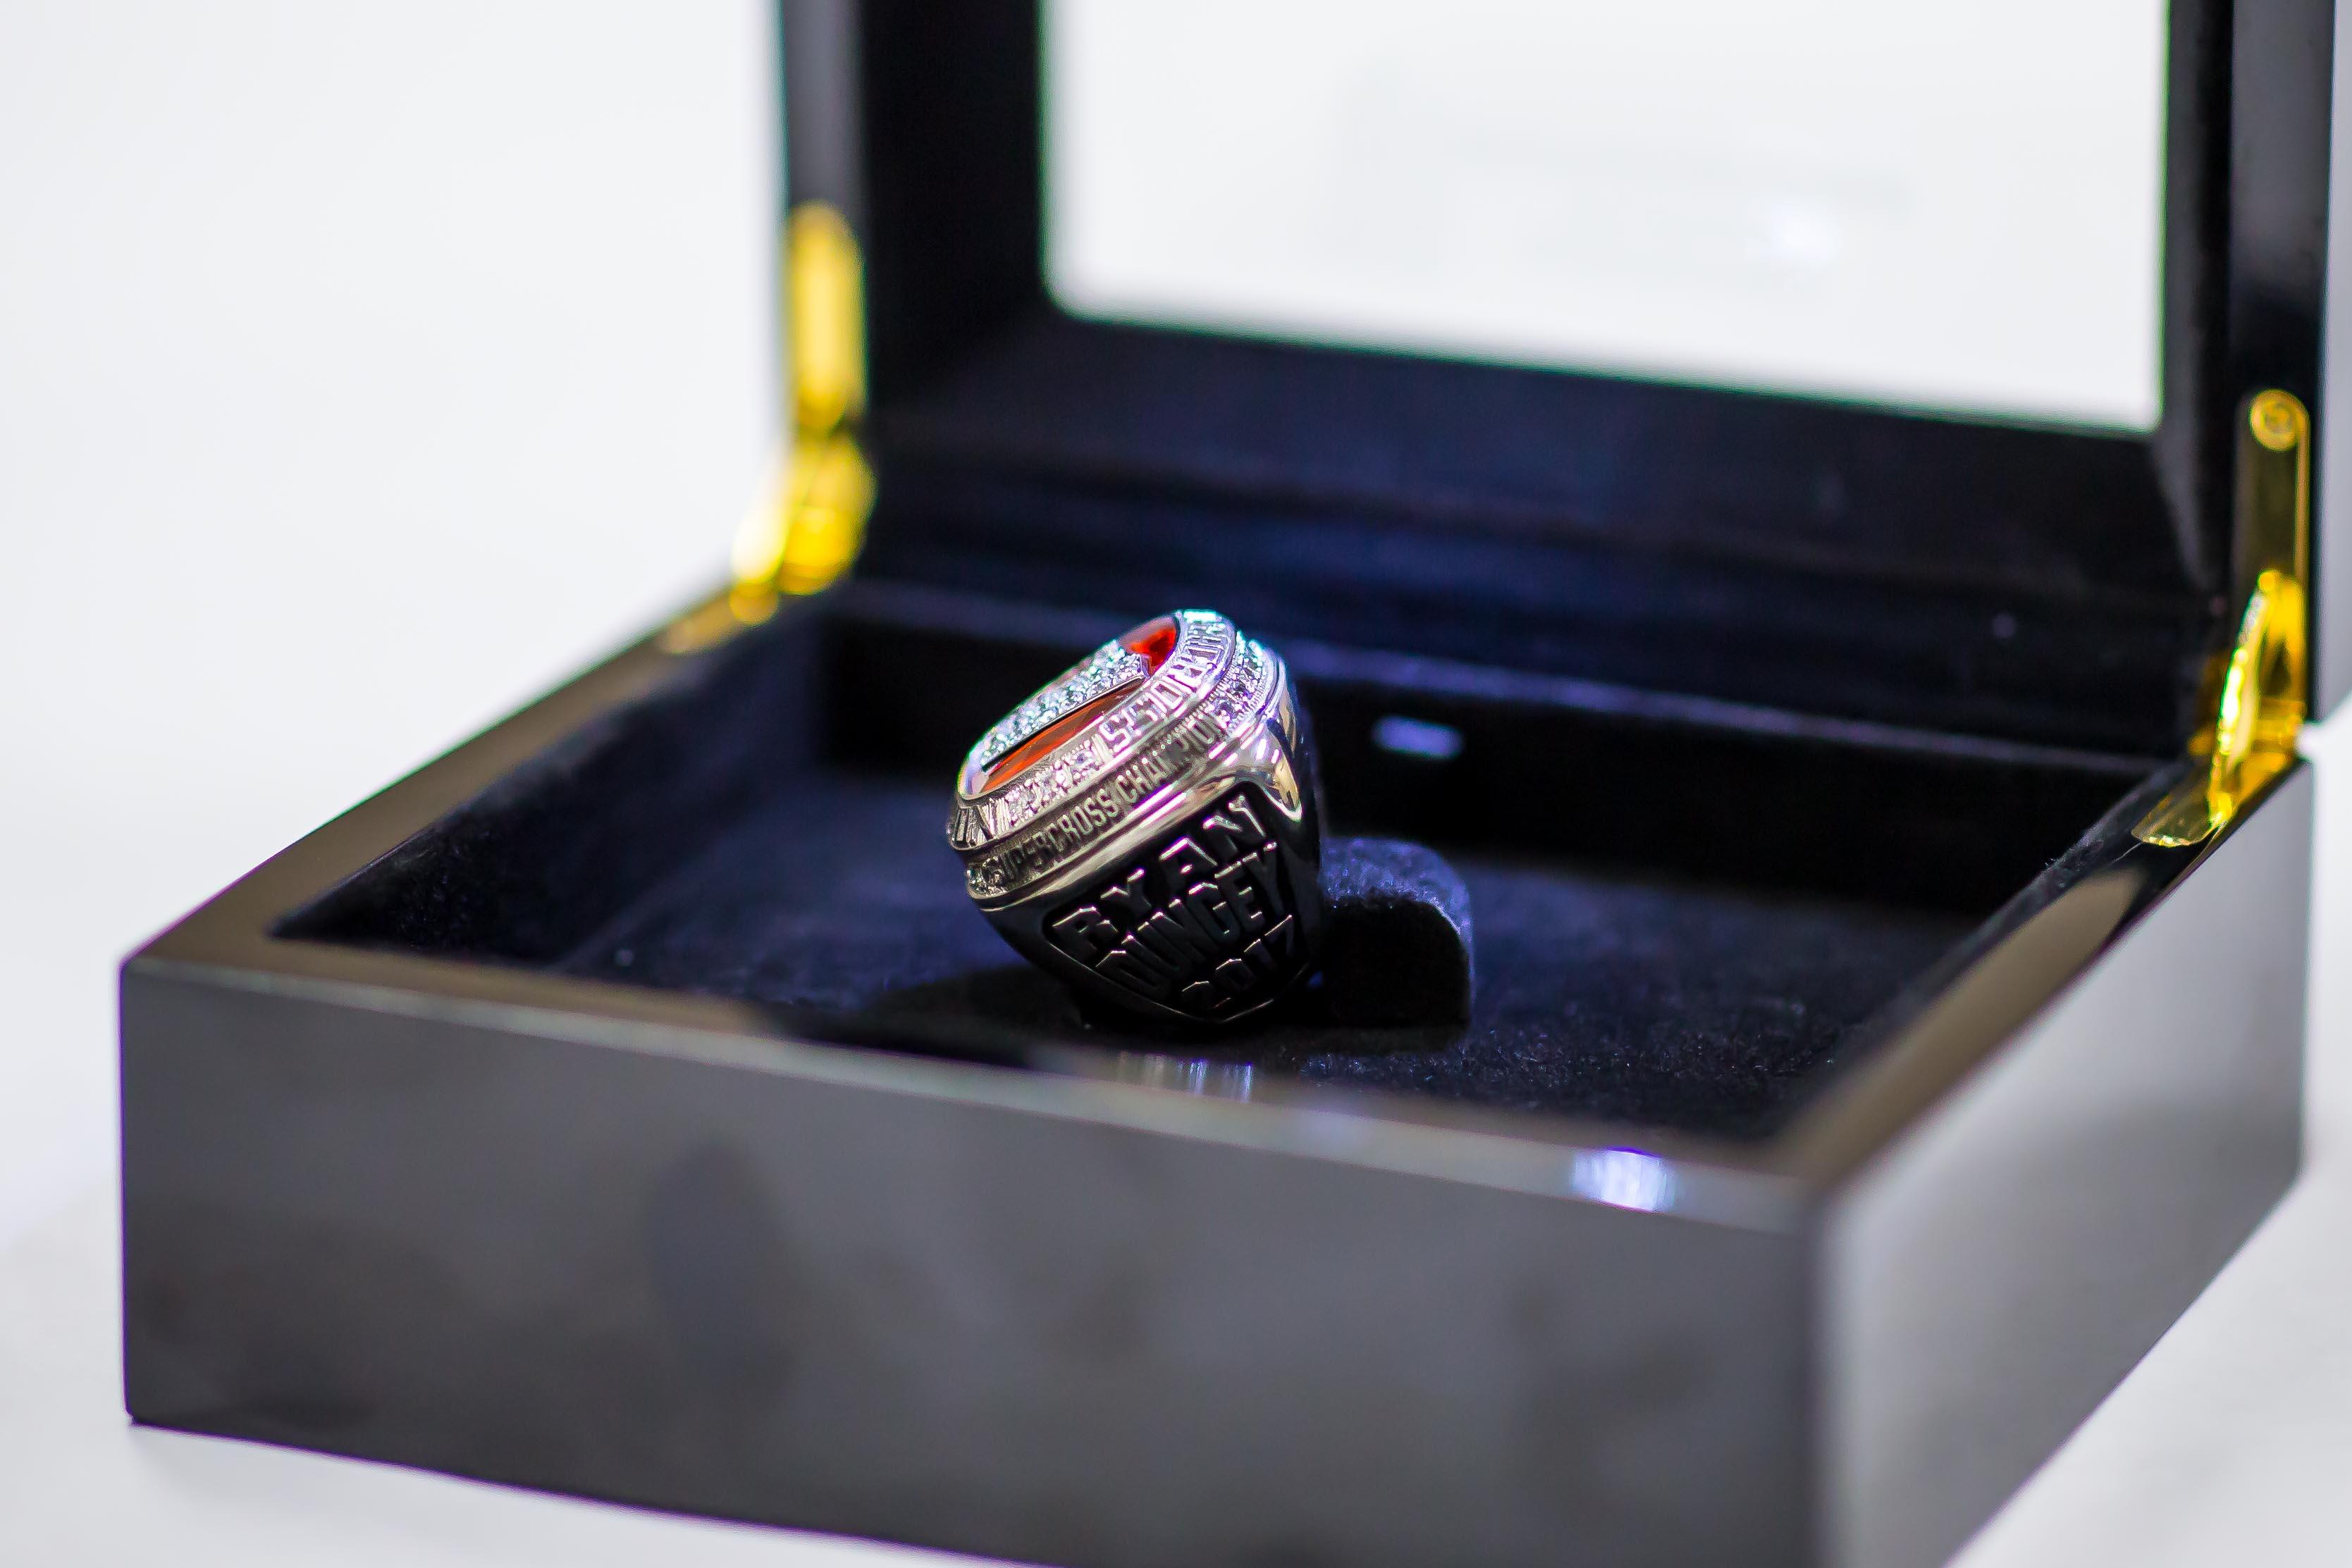 5 Ryan Dungey - Replica Ring and display case